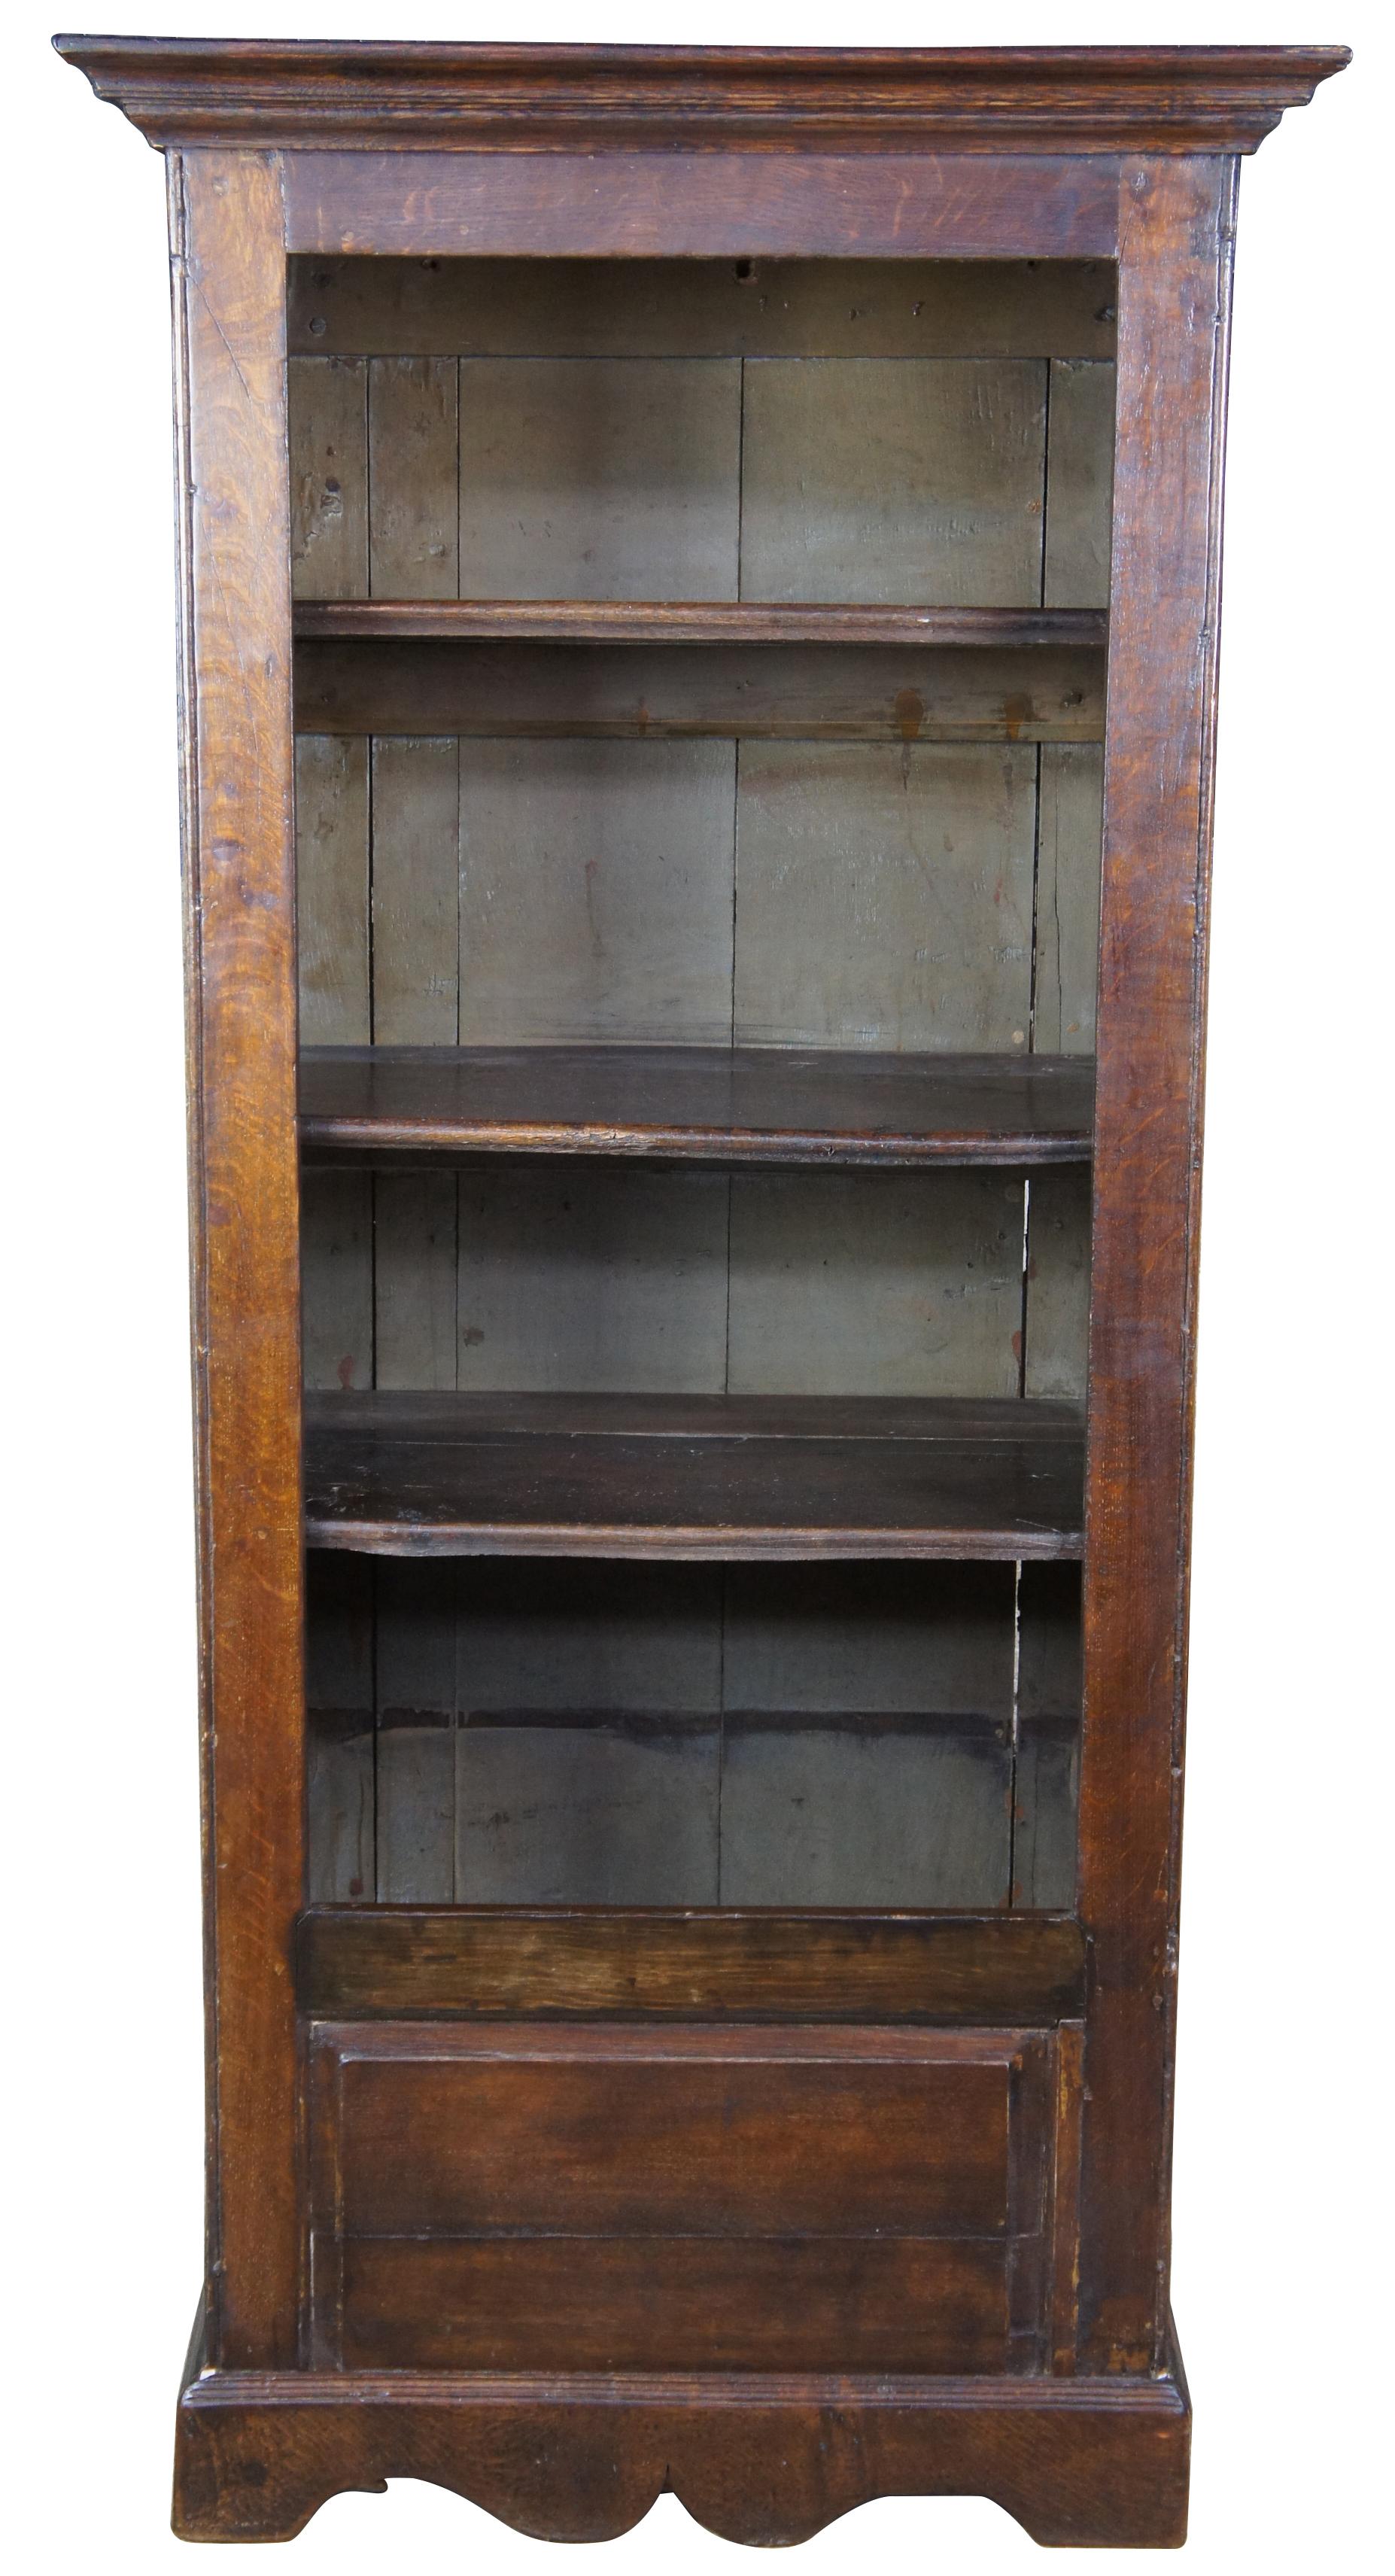 Primitive 18th century Welsh oak bookshelf or cabinet. Features three interior shelves, internal compartment, and paneled exterior. Measure: 72